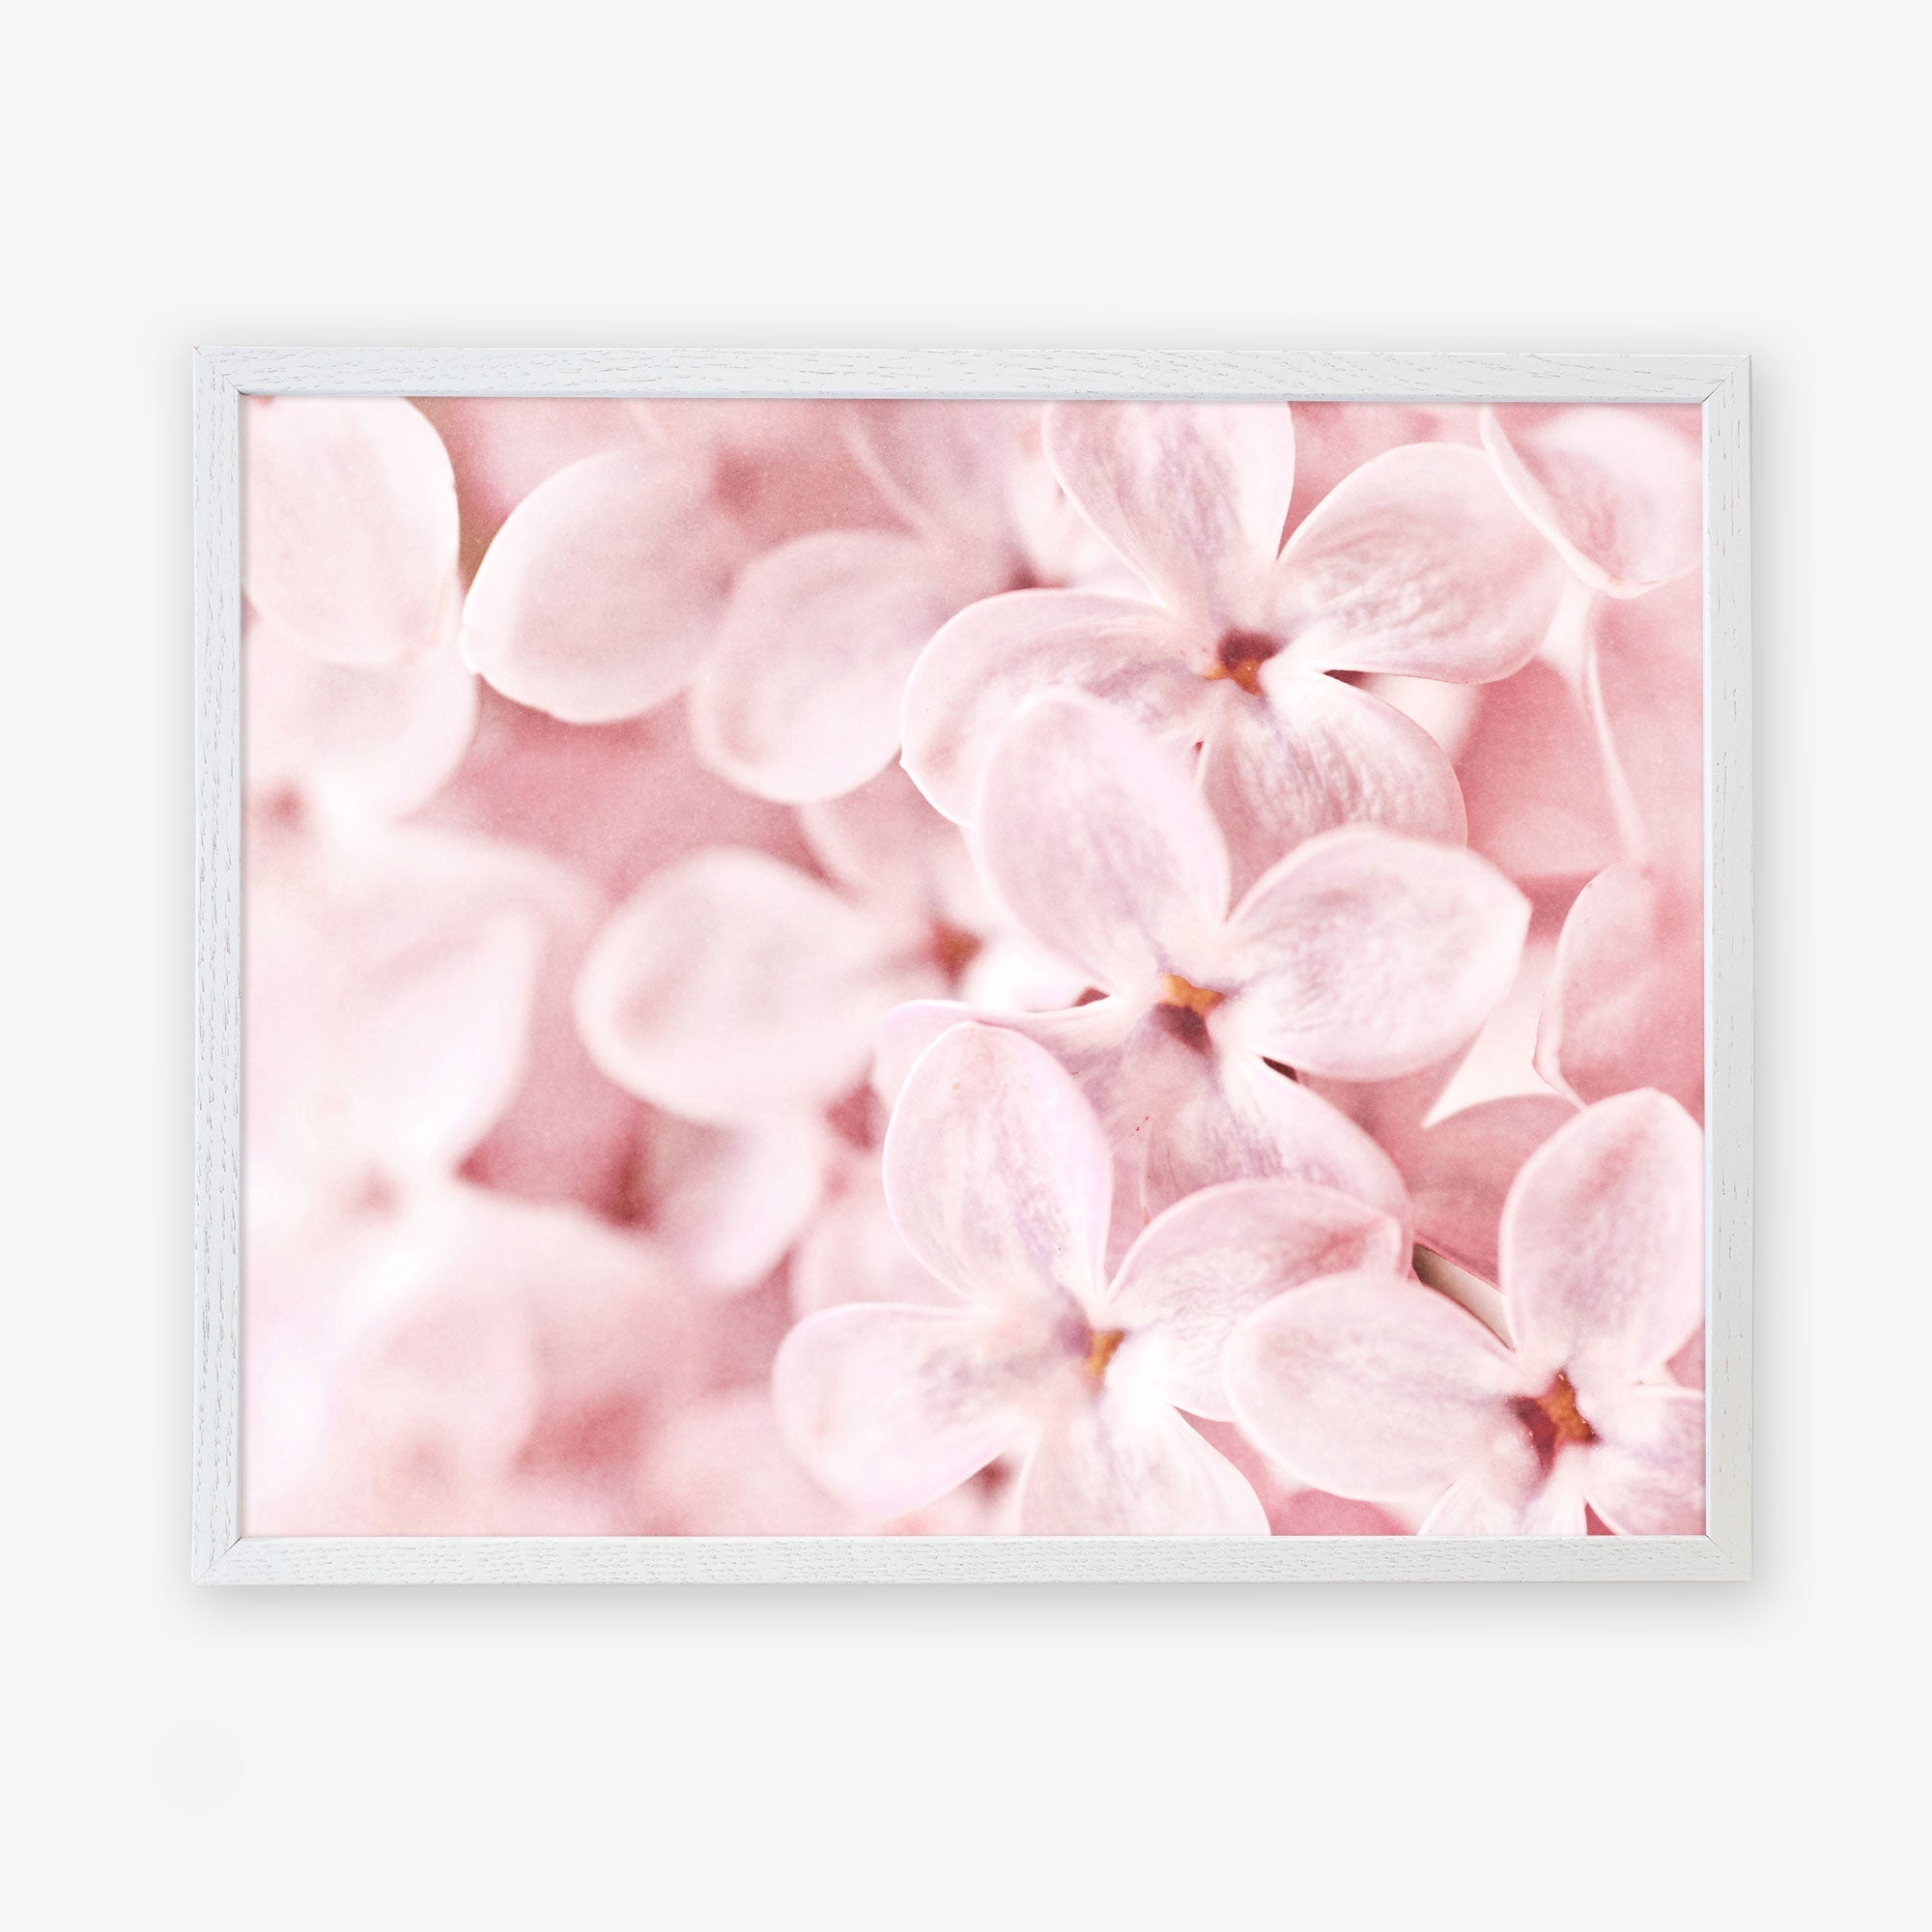 A framed photograph of delicate shabby pink lilac flowers, captured in close-up to highlight their soft petals and natural beauty - Pink Botanical Print, &#39;Bed of Lilacs&#39; by Offley Green.